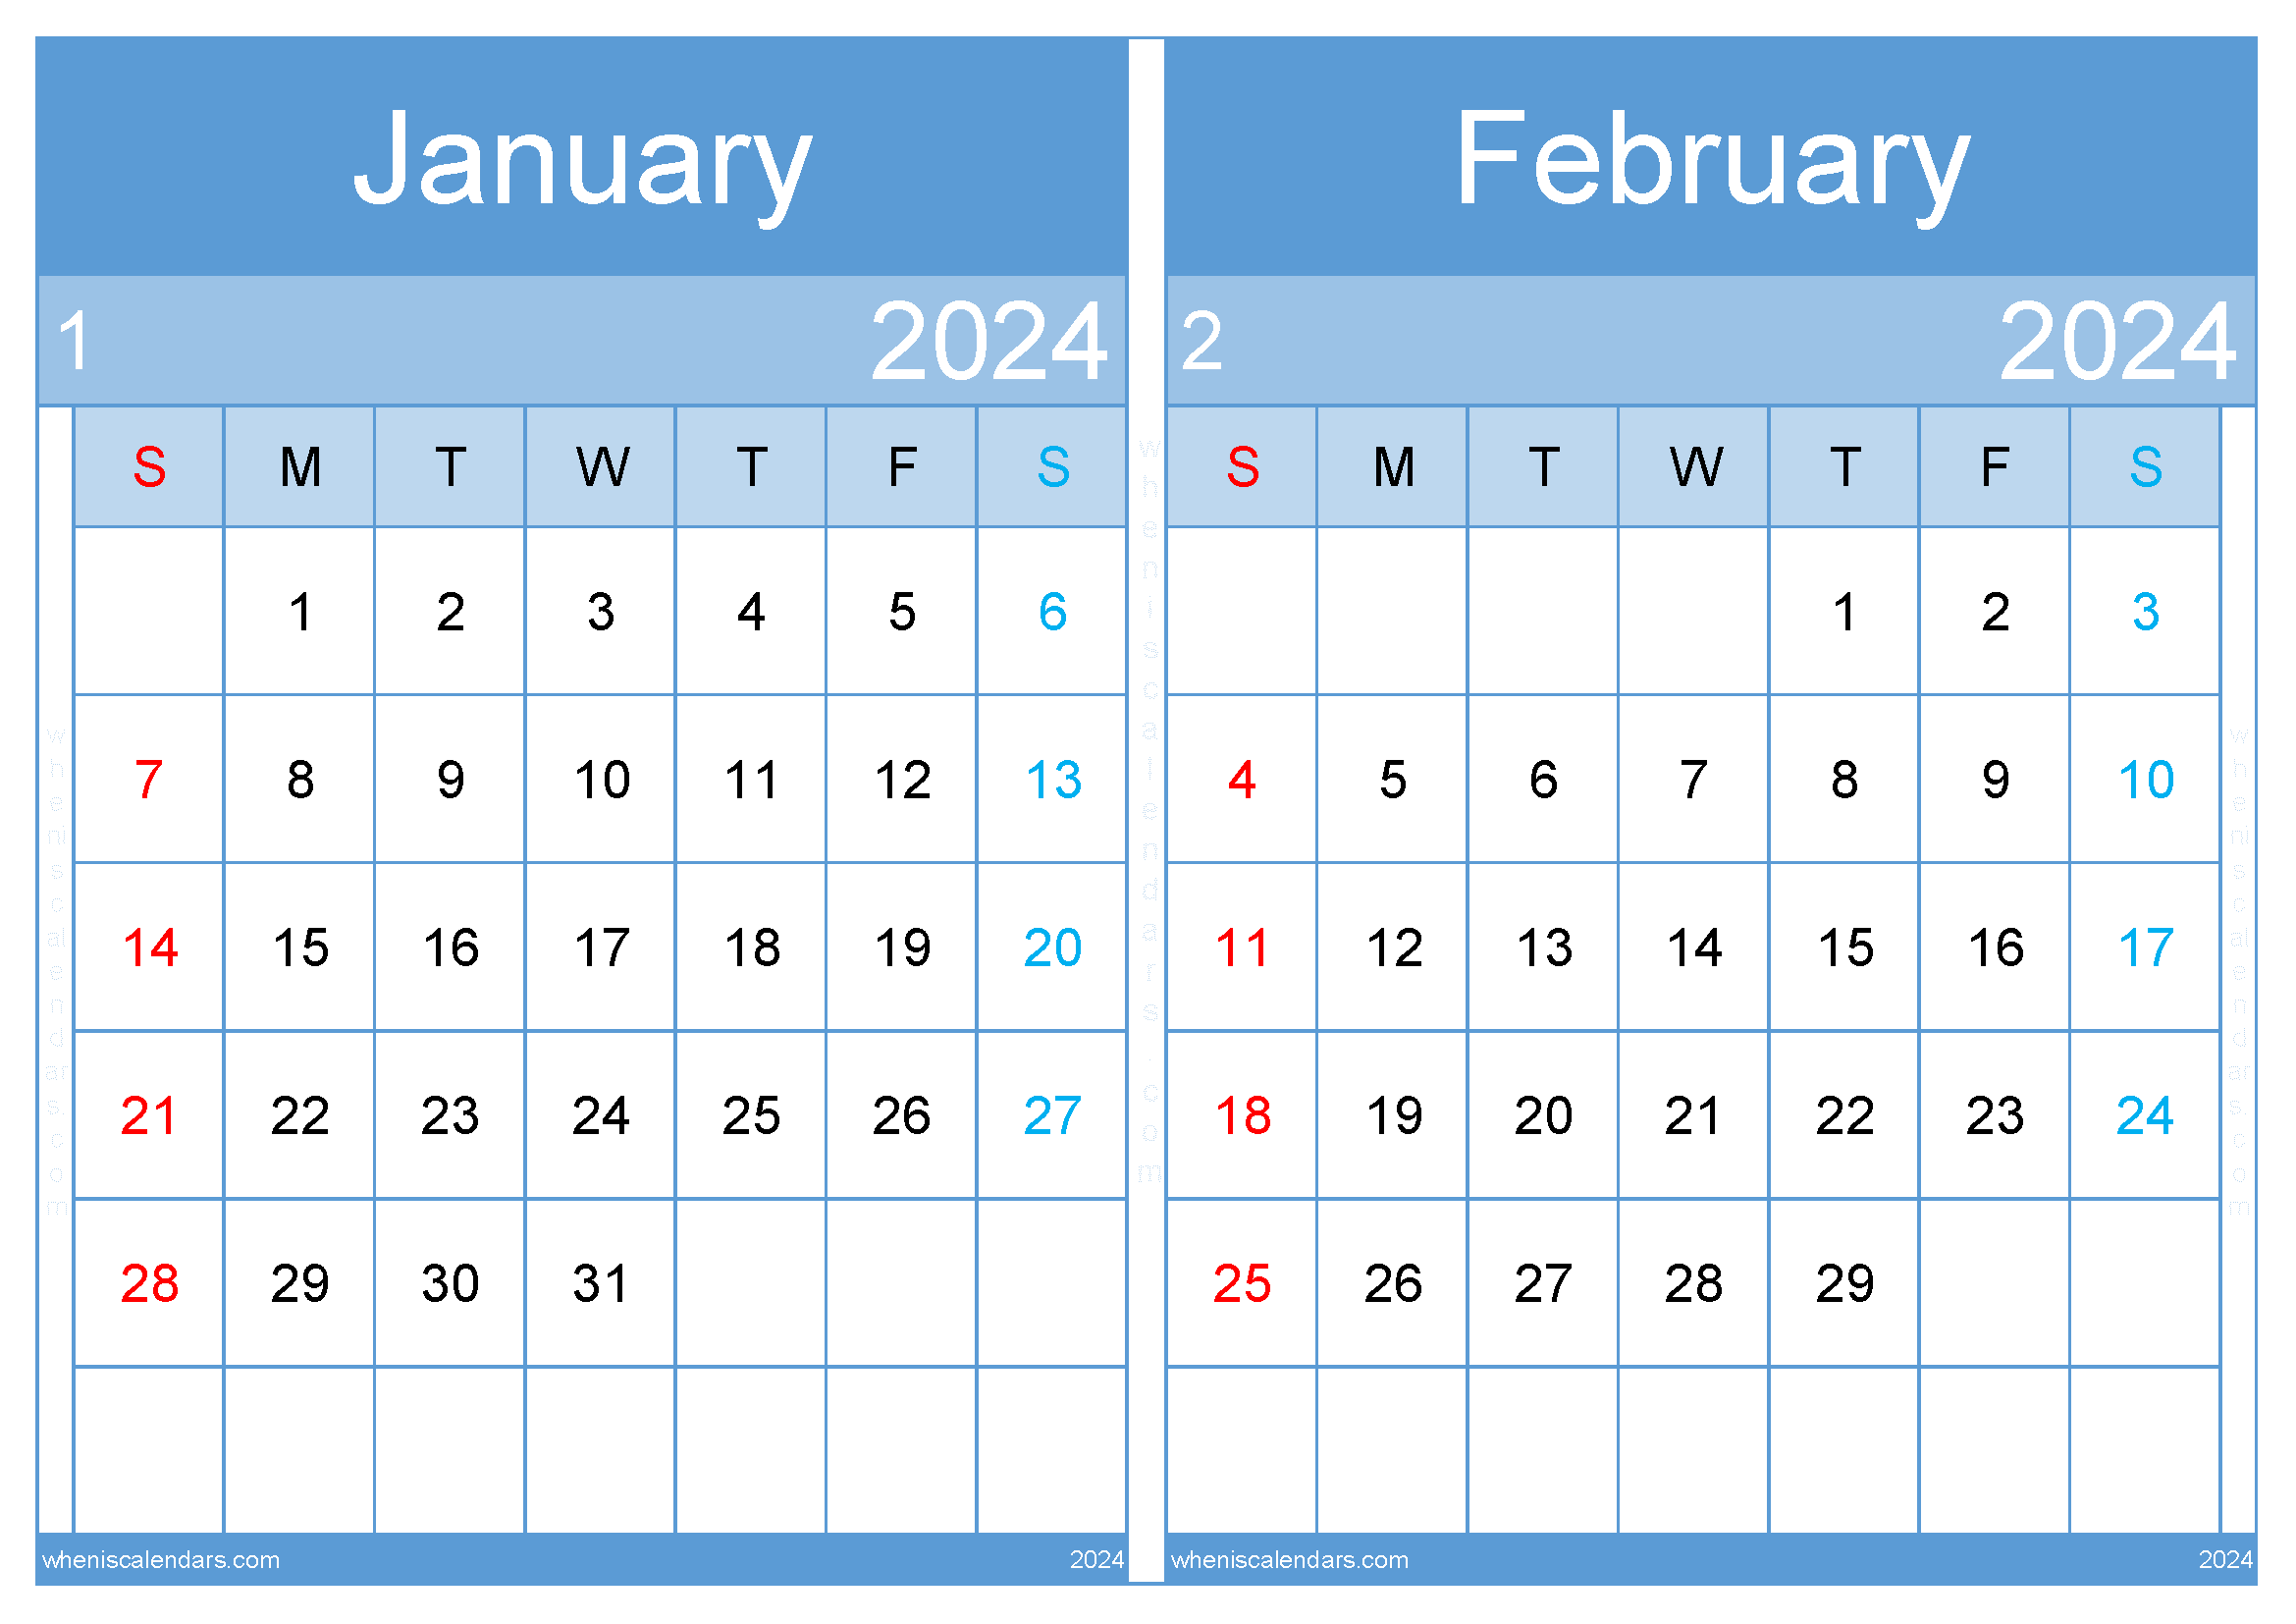 January and February 2024 Calendar Two-Month